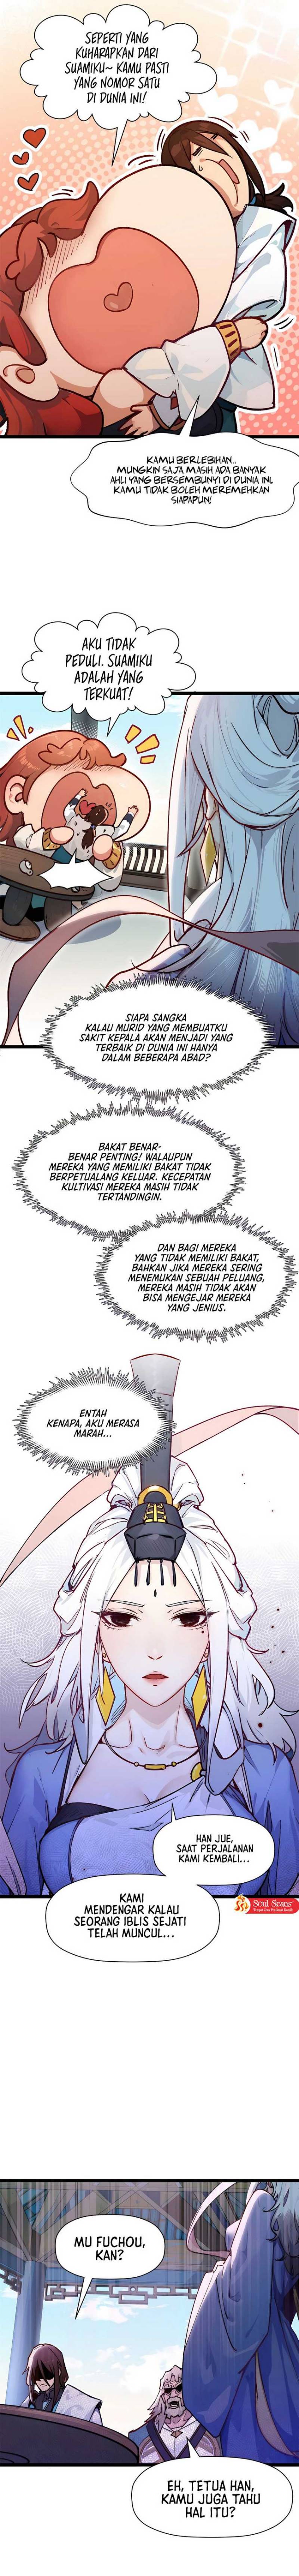 Dilarang COPAS - situs resmi www.mangacanblog.com - Komik top tier providence secretly cultivate for a thousand years 151 - chapter 151 152 Indonesia top tier providence secretly cultivate for a thousand years 151 - chapter 151 Terbaru 10|Baca Manga Komik Indonesia|Mangacan